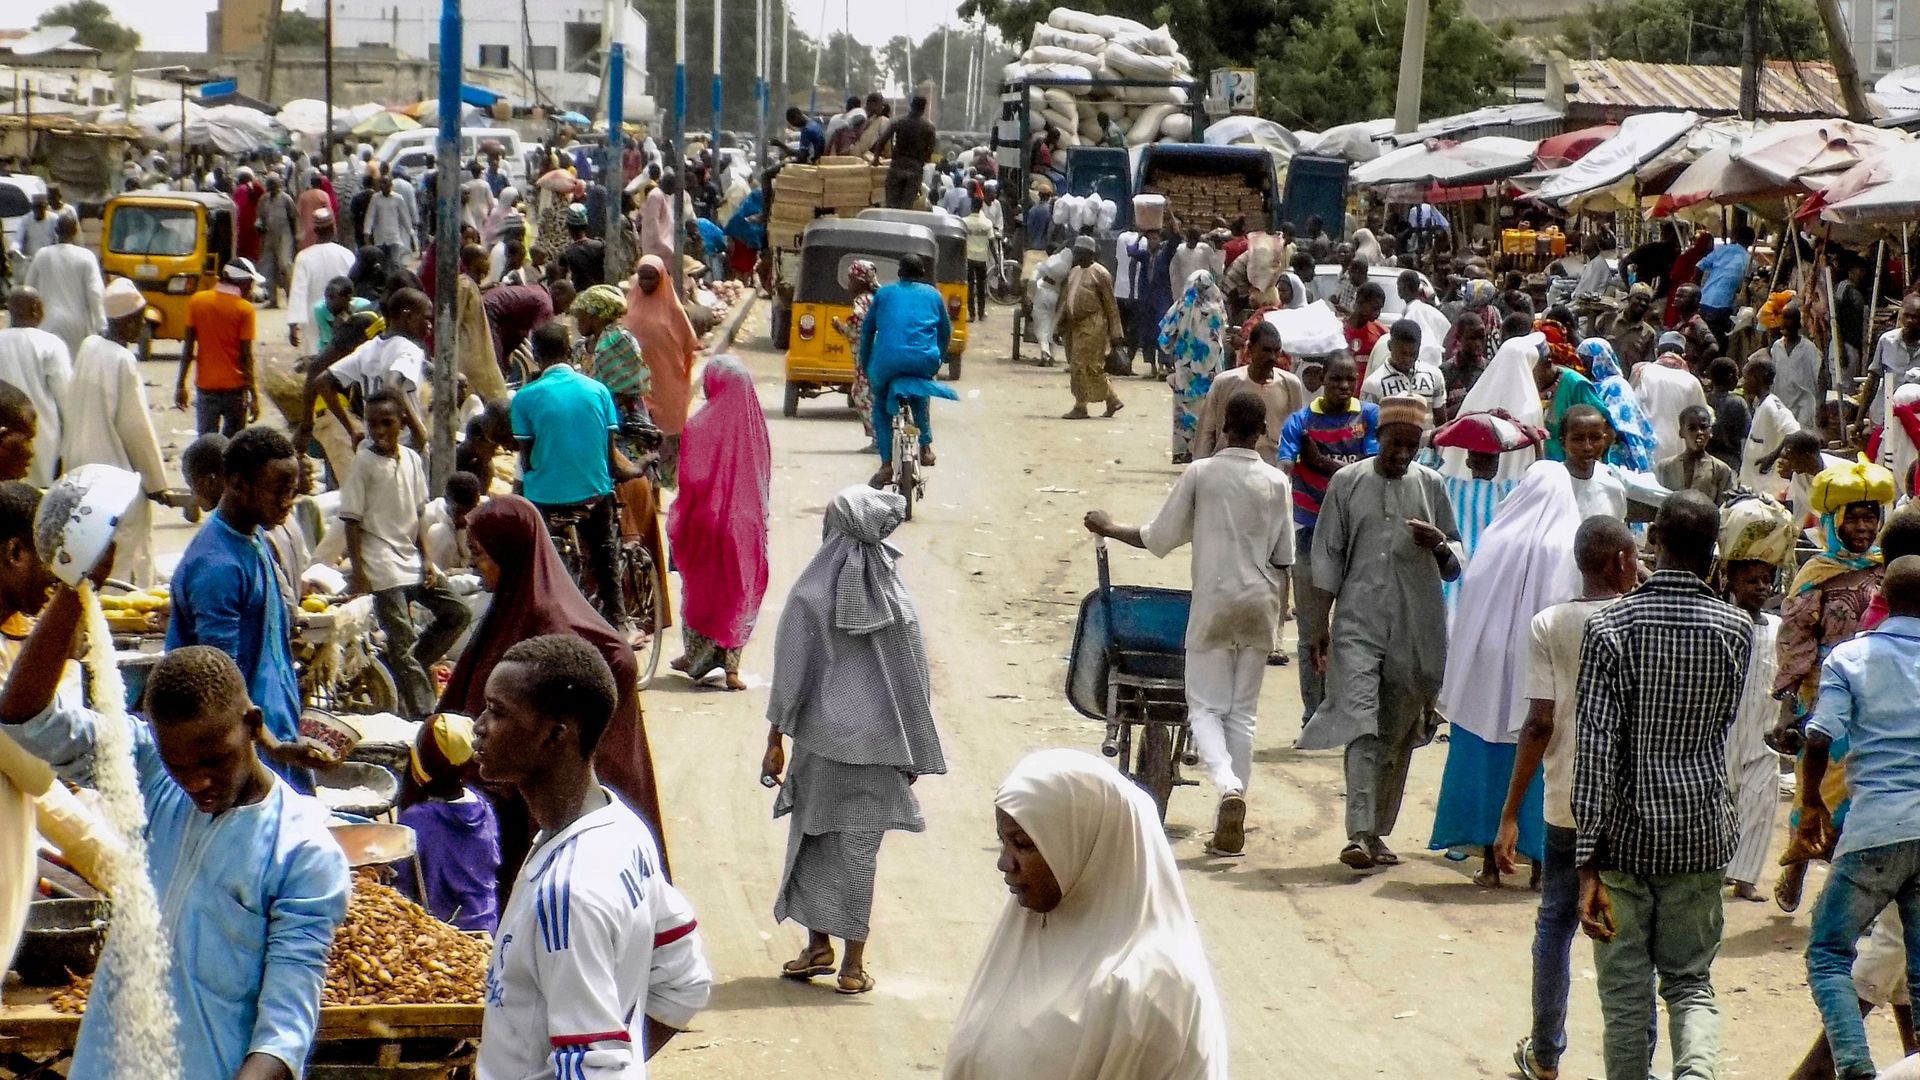 People at a market in Nigeria